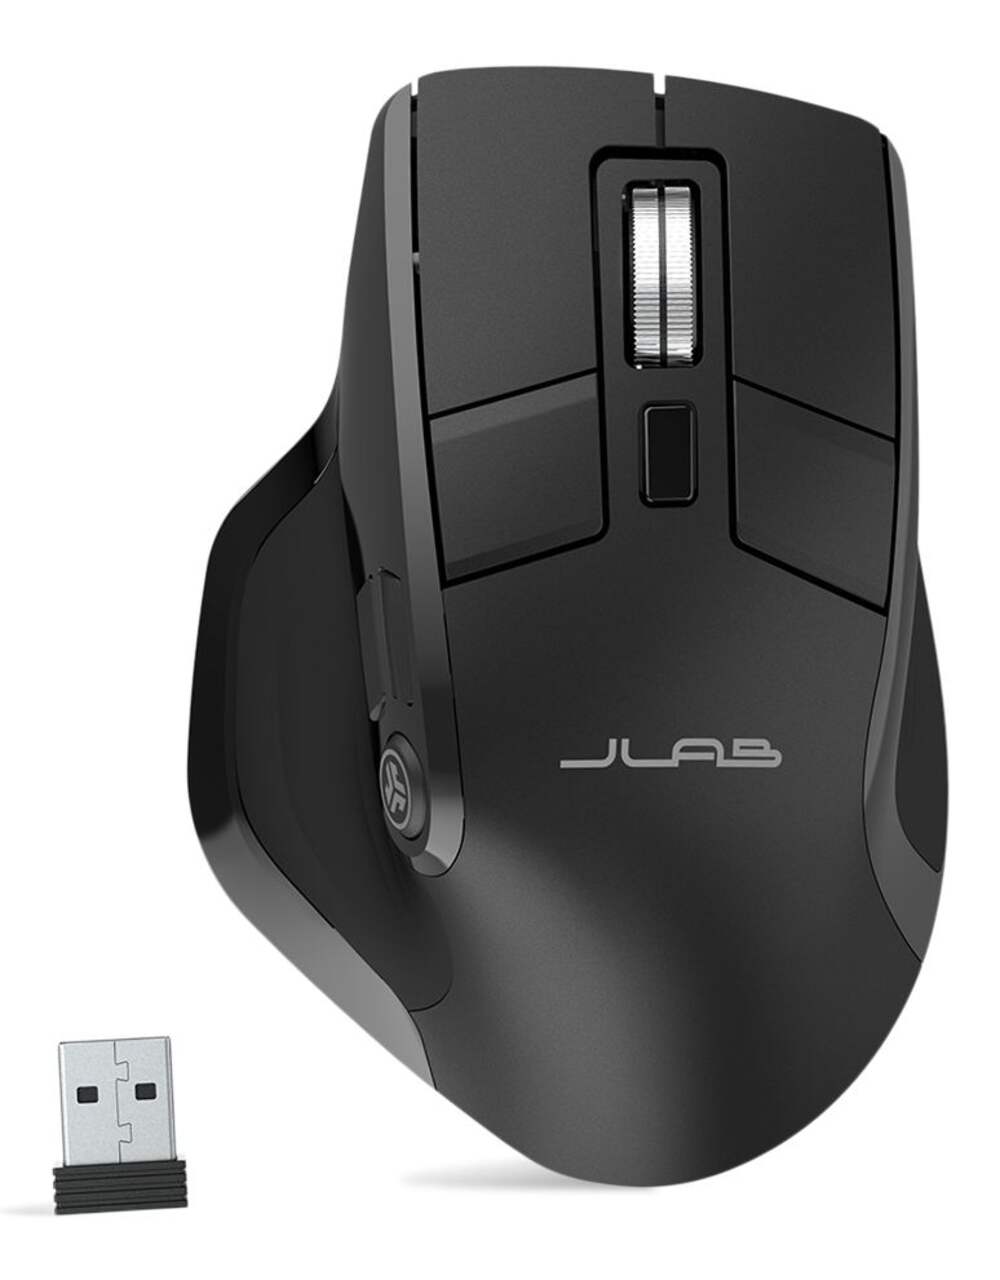 https://media-www.canadiantire.ca/product/automotive/electronics/home-electronics/0695009/jlab-epic-wireless-mouse-6283cca9-9b59-4f64-aced-c3ce52db8e08-jpgrendition.jpg?imdensity=1&imwidth=640&impolicy=mZoom